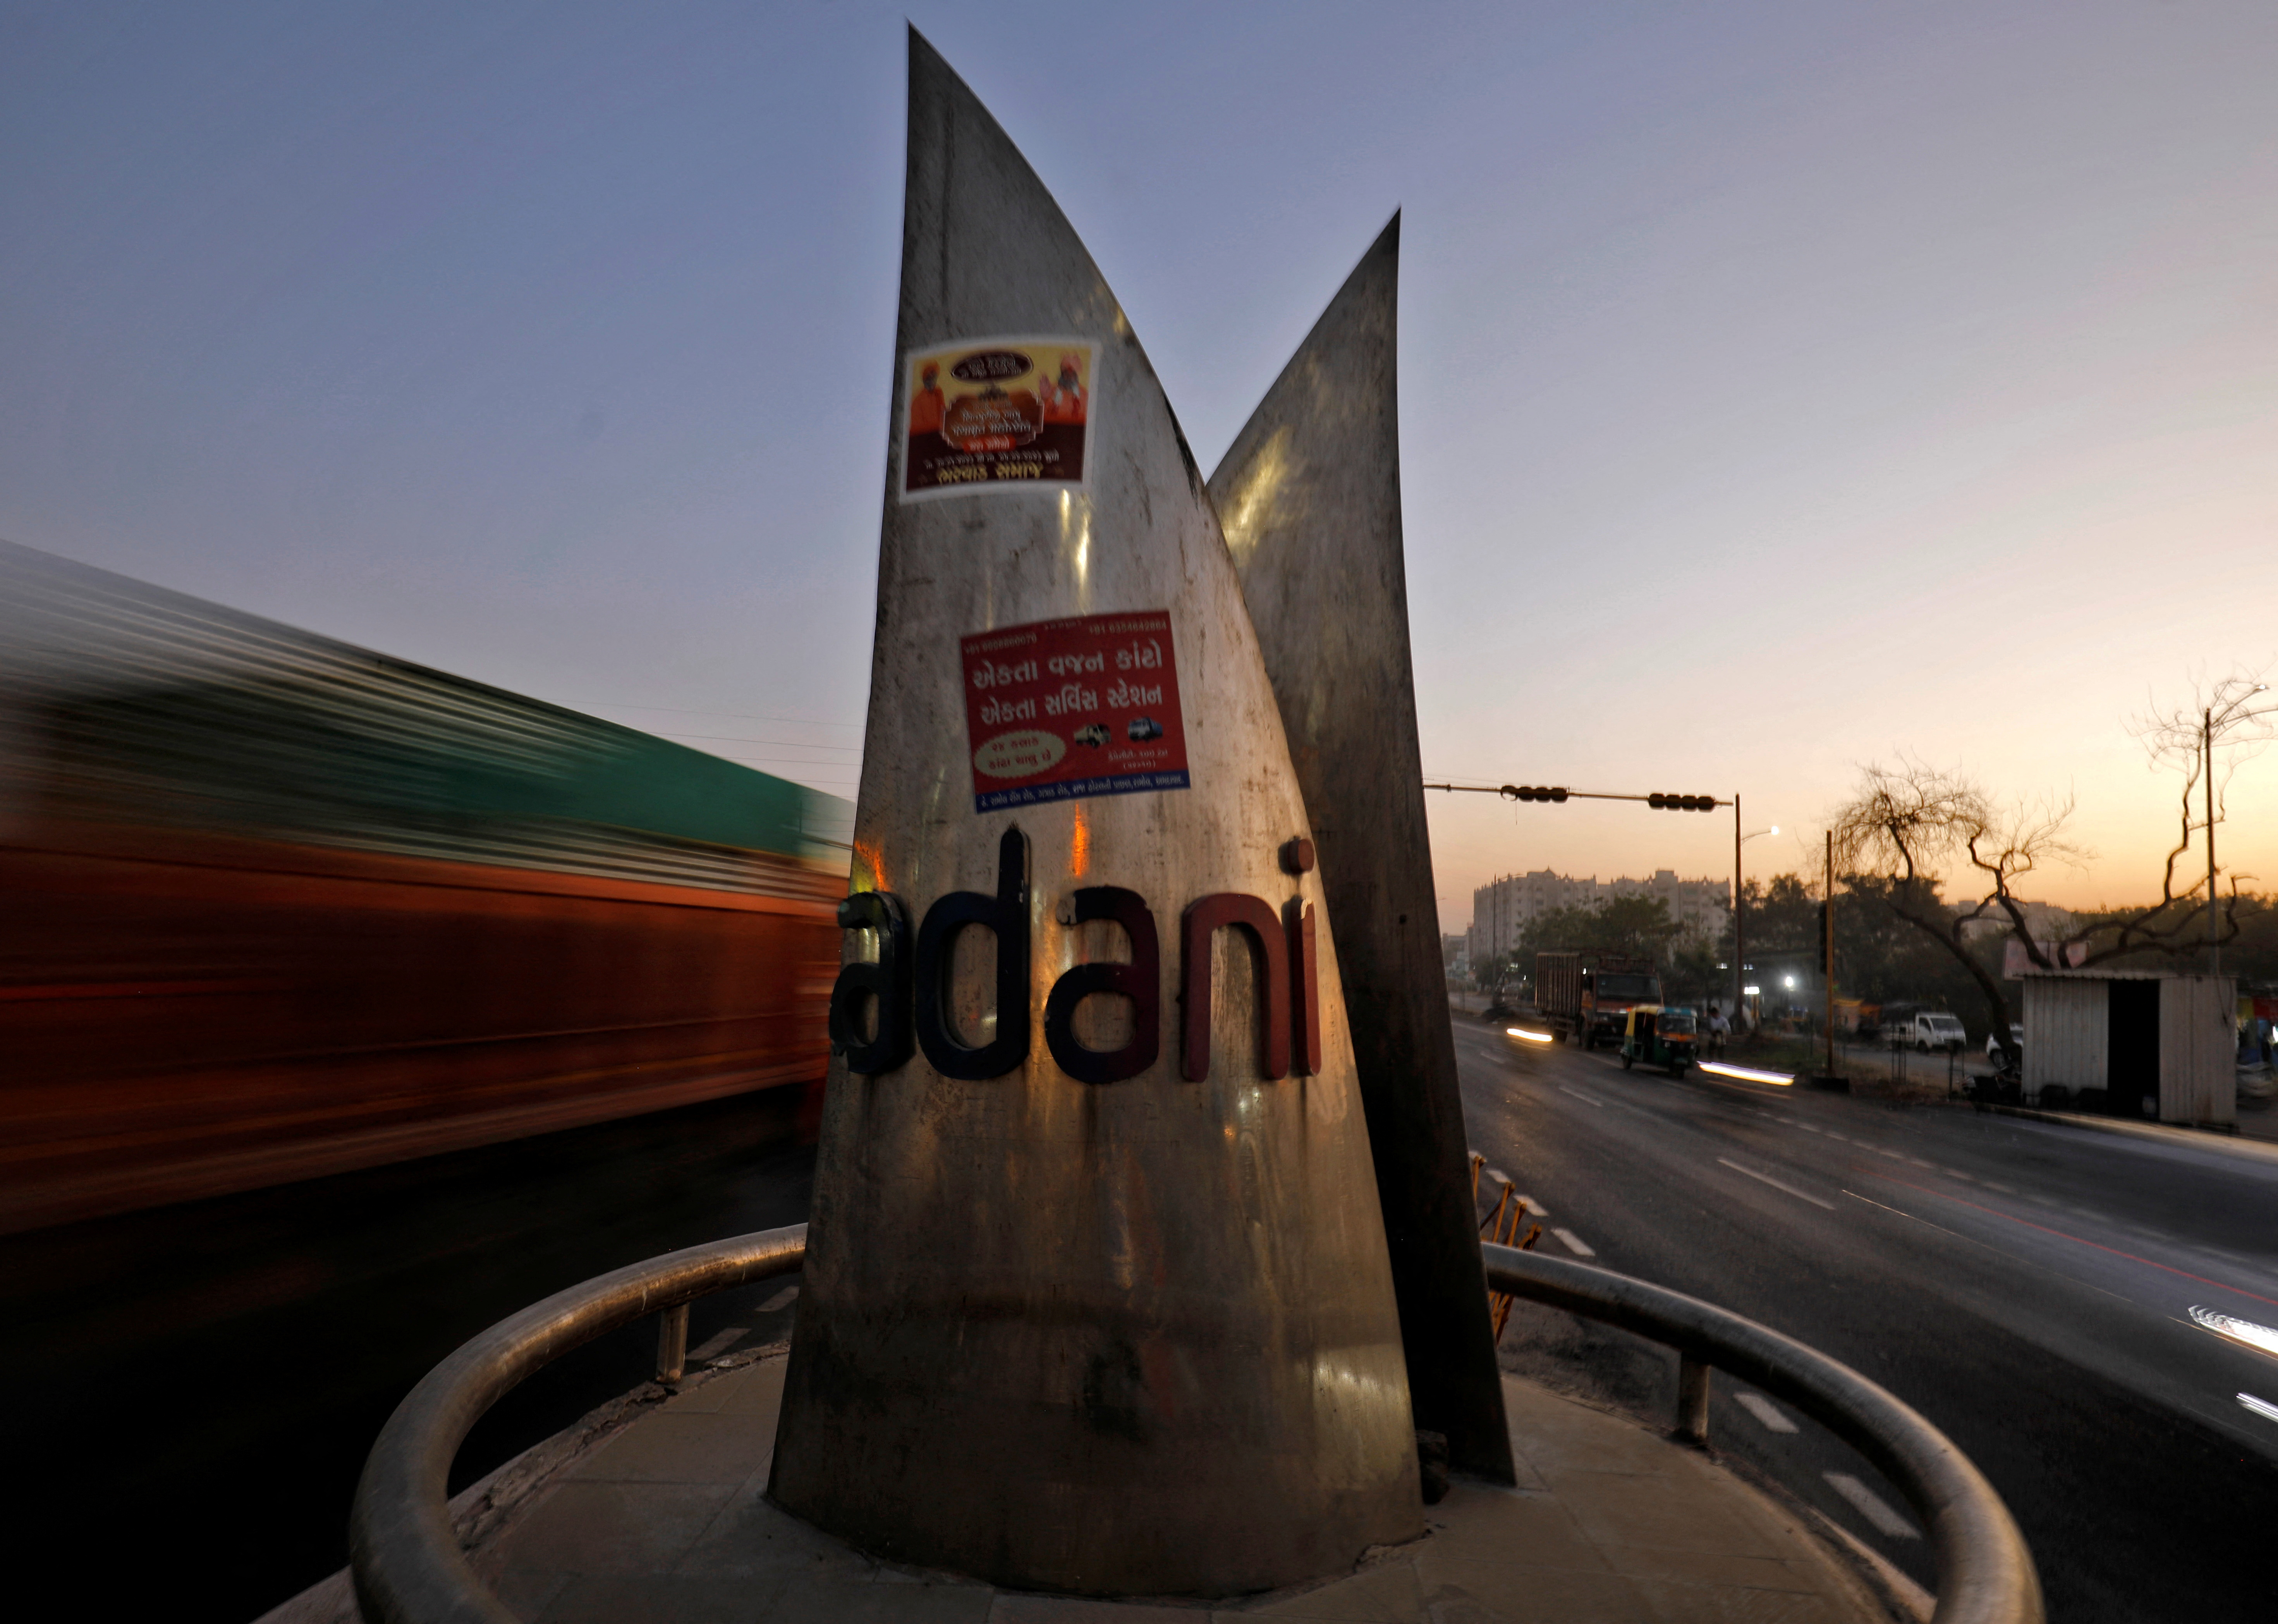 Traffic moves past the logo of the Adani Group installed at a roundabout on the ring road in Ahmedabad